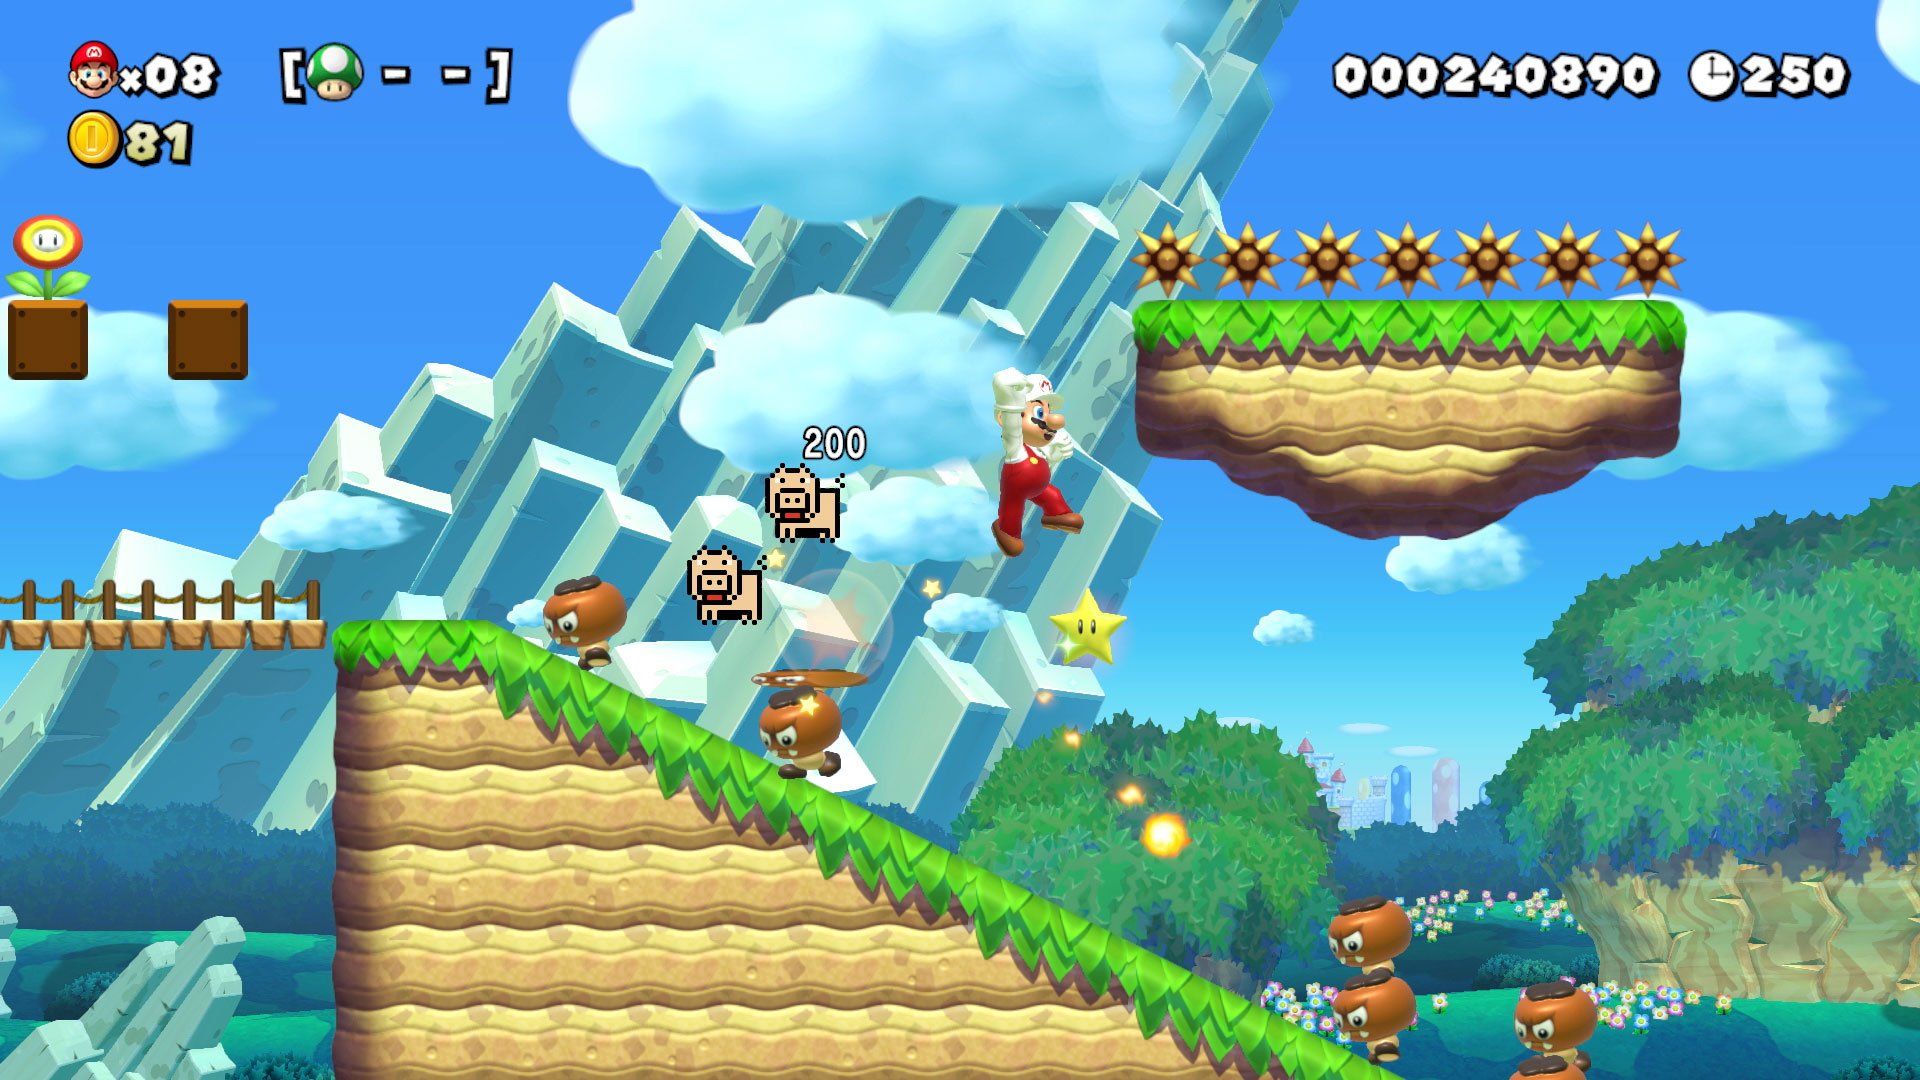 Super Mario Maker 2 Inspires Creativity With New Clear Conditions